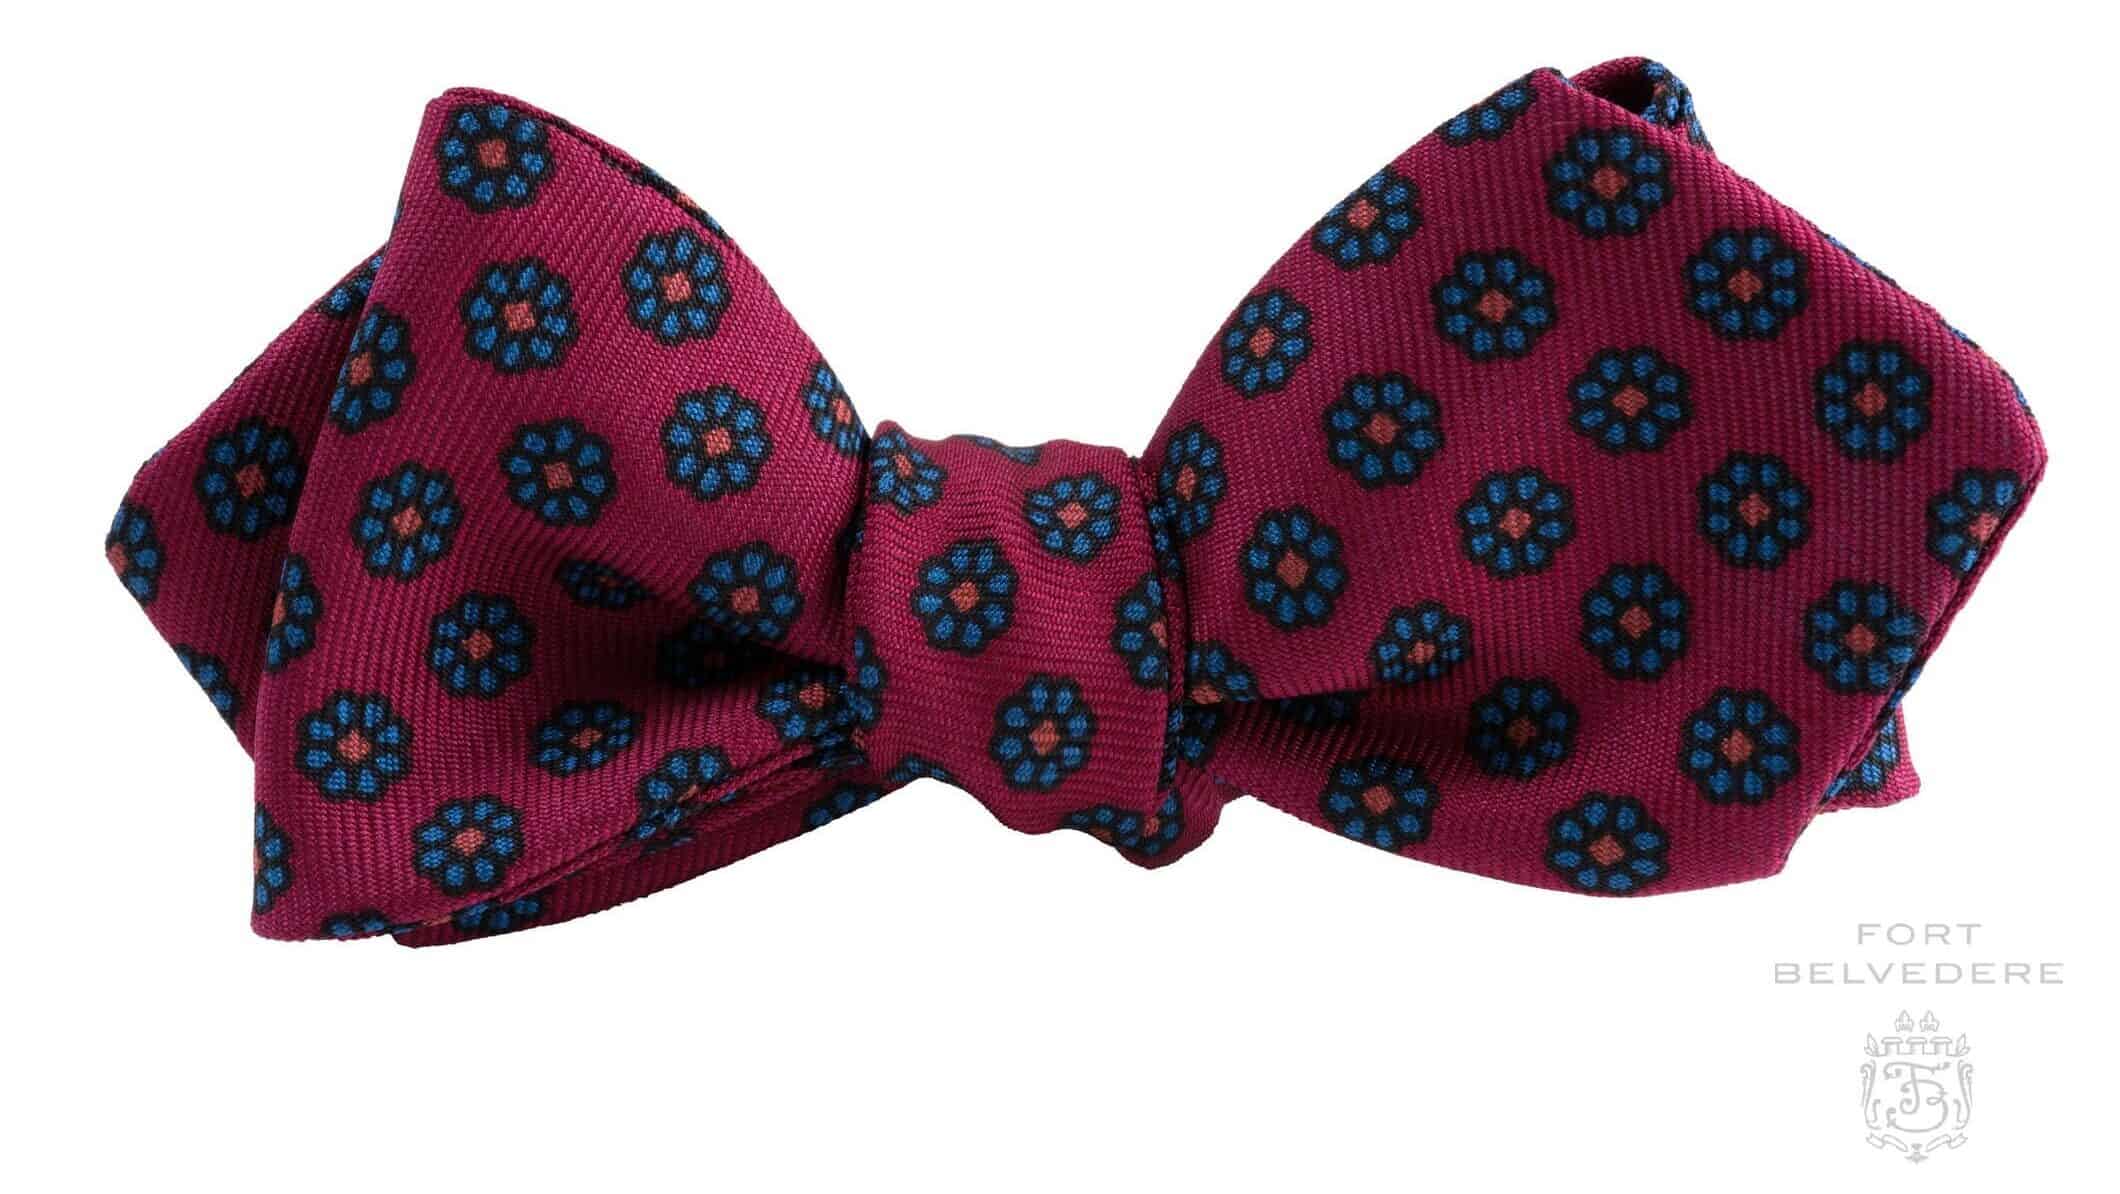 Bow Tie in Soft Ancient Madder Silk with Red Macclesfield Neats Micropattern